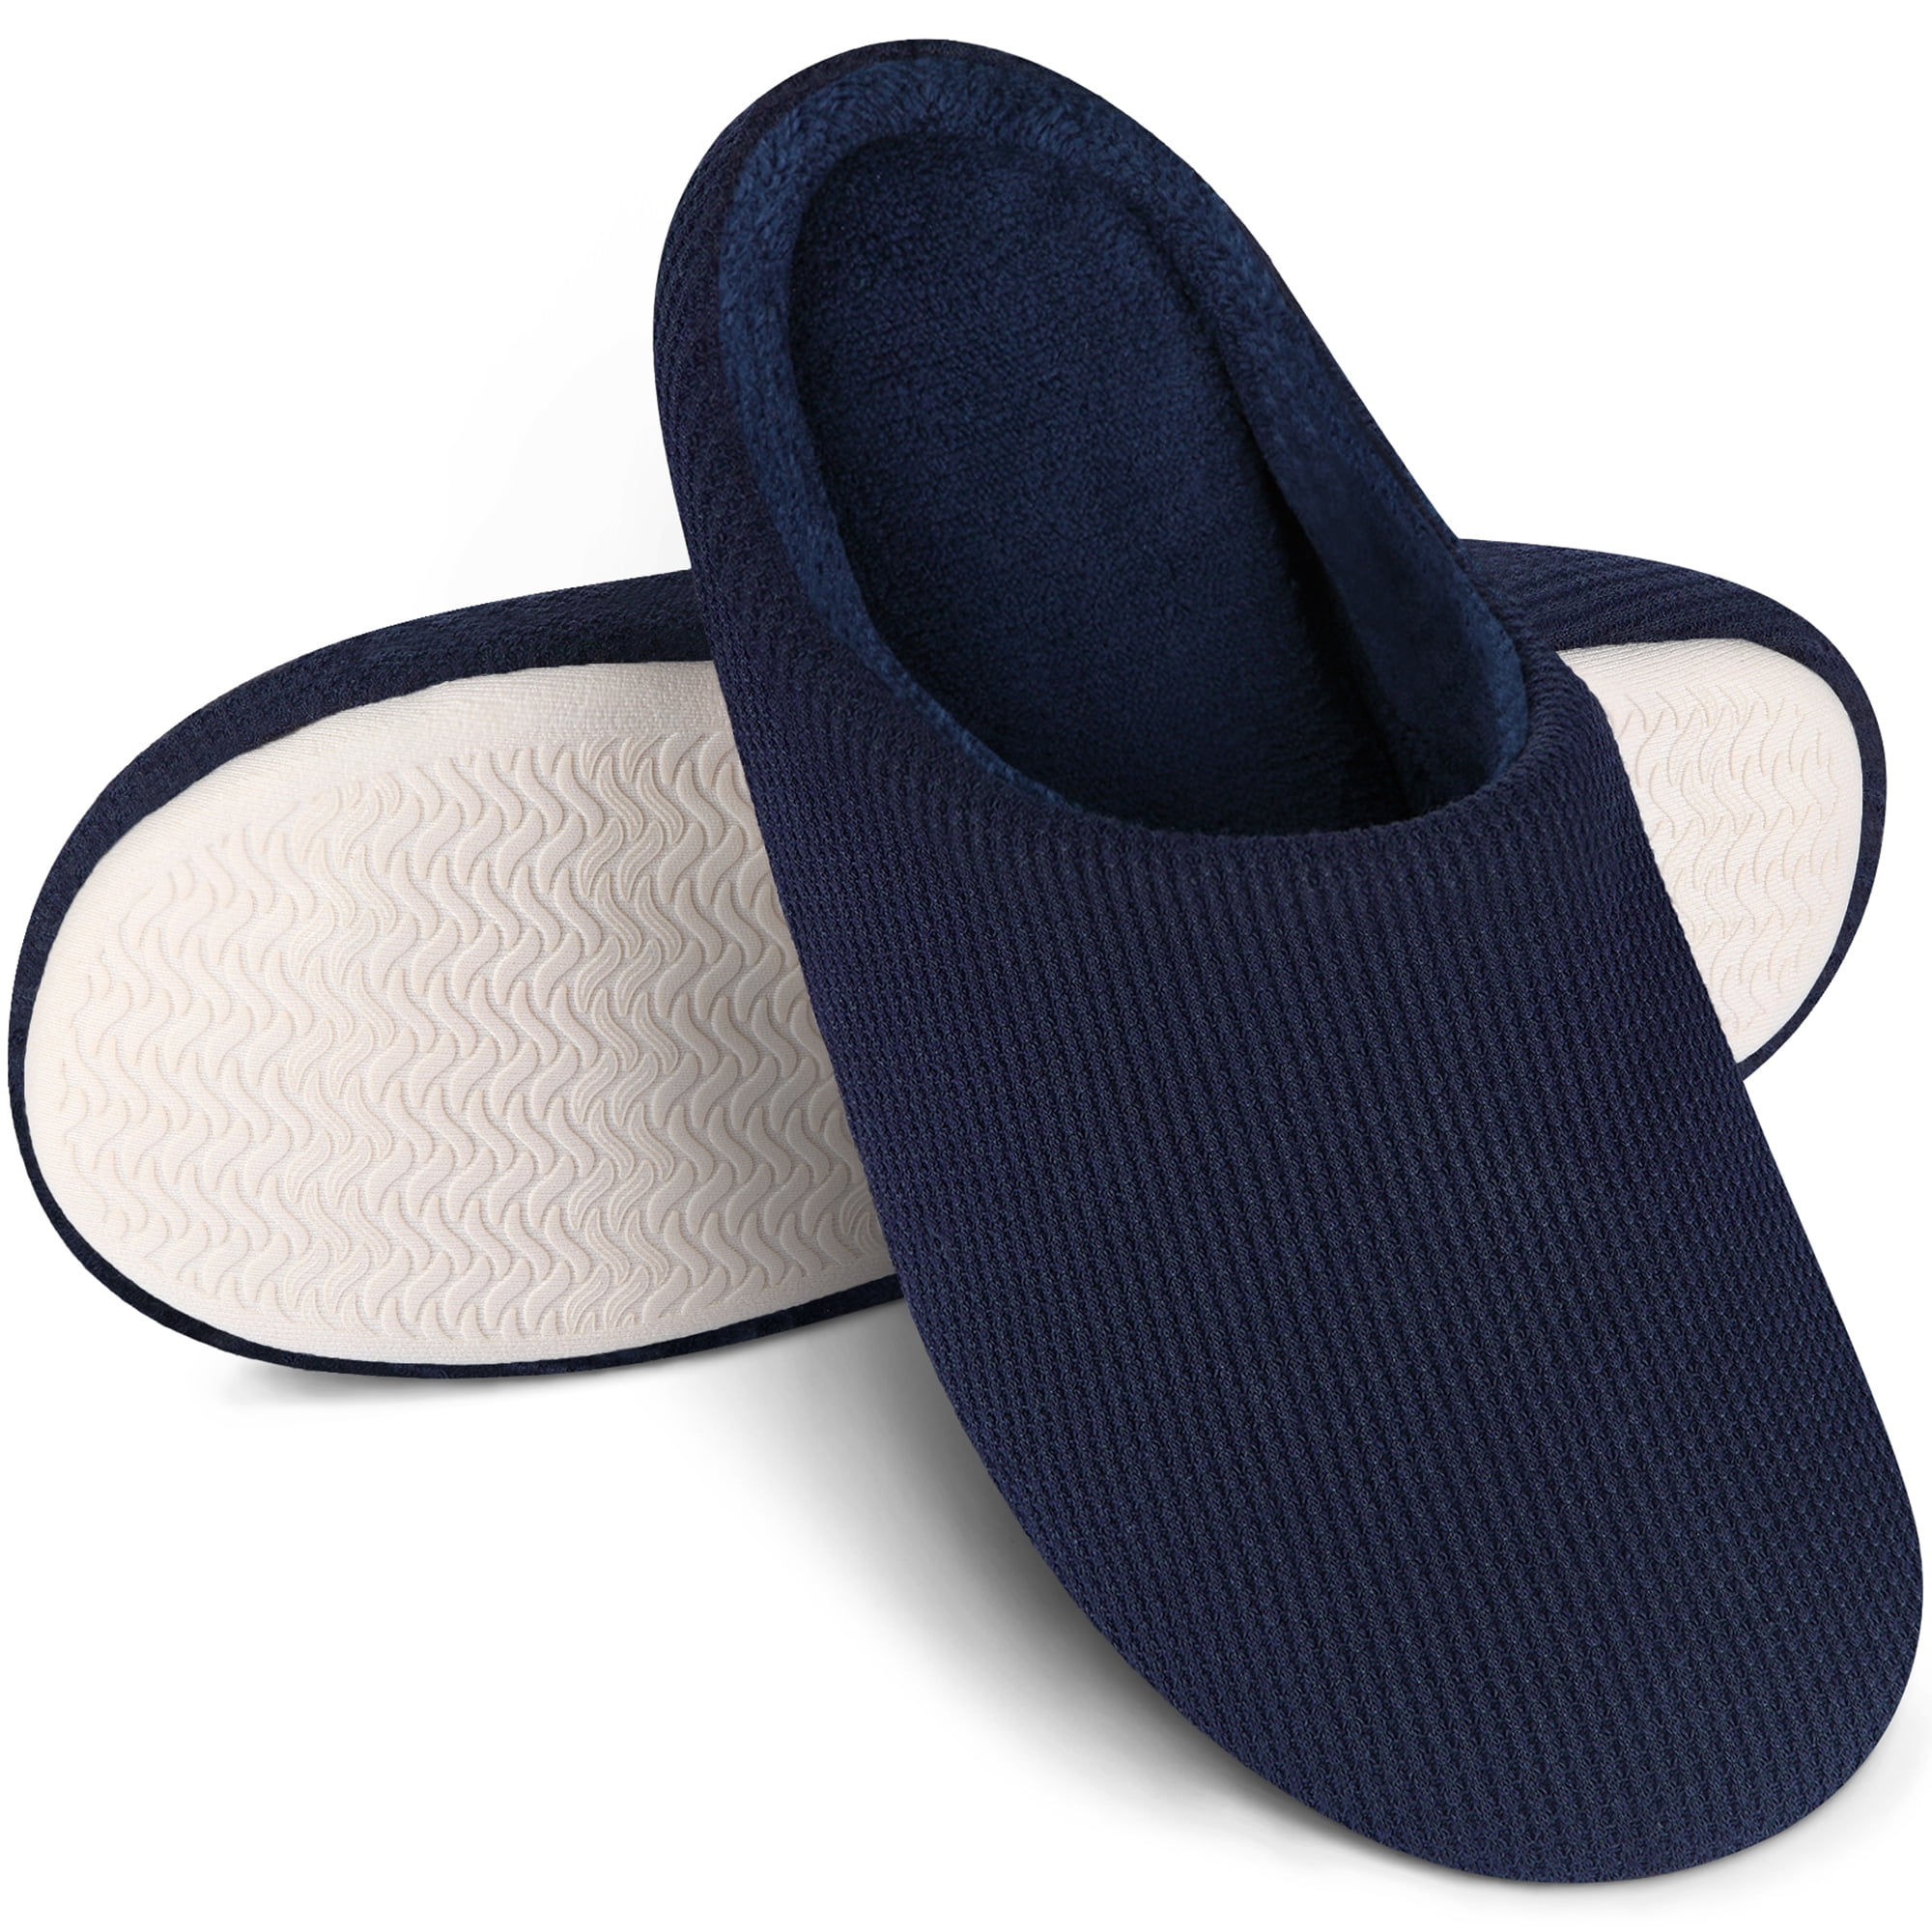 Mens Womens Comfort Slip On Memory Foam Slippers French Terry Lining House Slippers with Anti Slip Sole